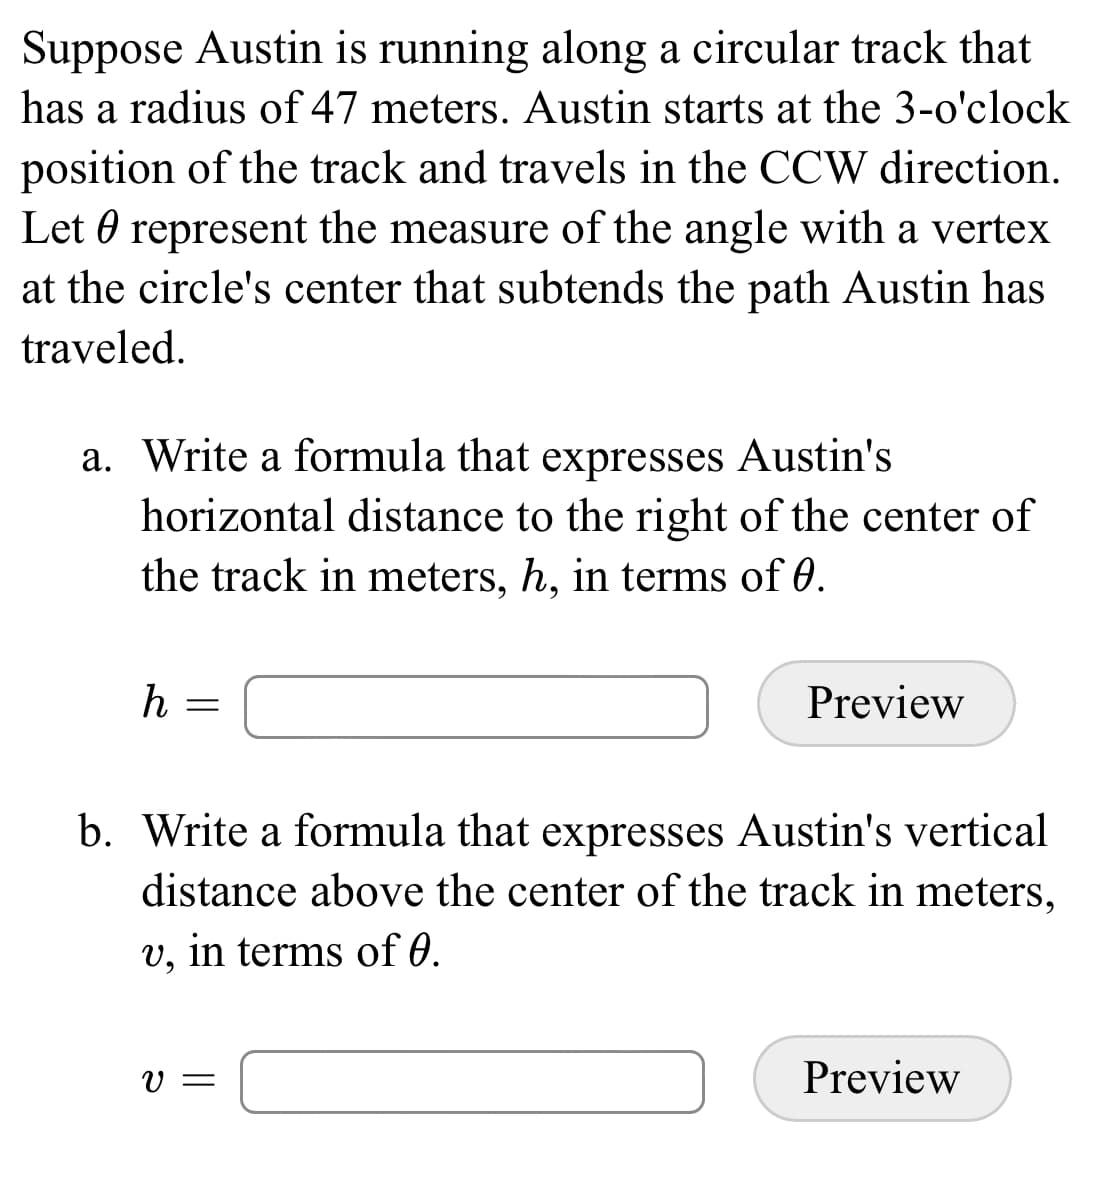 Suppose Austin is running along a circular track that
has a radius of 47 meters. Austin starts at the 3-o'clock
position of the track and travels in the CCW direction.
Let 0 represent the measure of the angle with a vertex
at the circle's center that subtends the path Austin has
traveled.
a. Write a formula that expresses Austin's
horizontal distance to the right of the center of
the track in meters, h, in terms of 0.
h
Preview
b. Write a formula that expresses Austin's vertical
distance above the center of the track in meters,
v, in terms of 0.
V =
Preview
